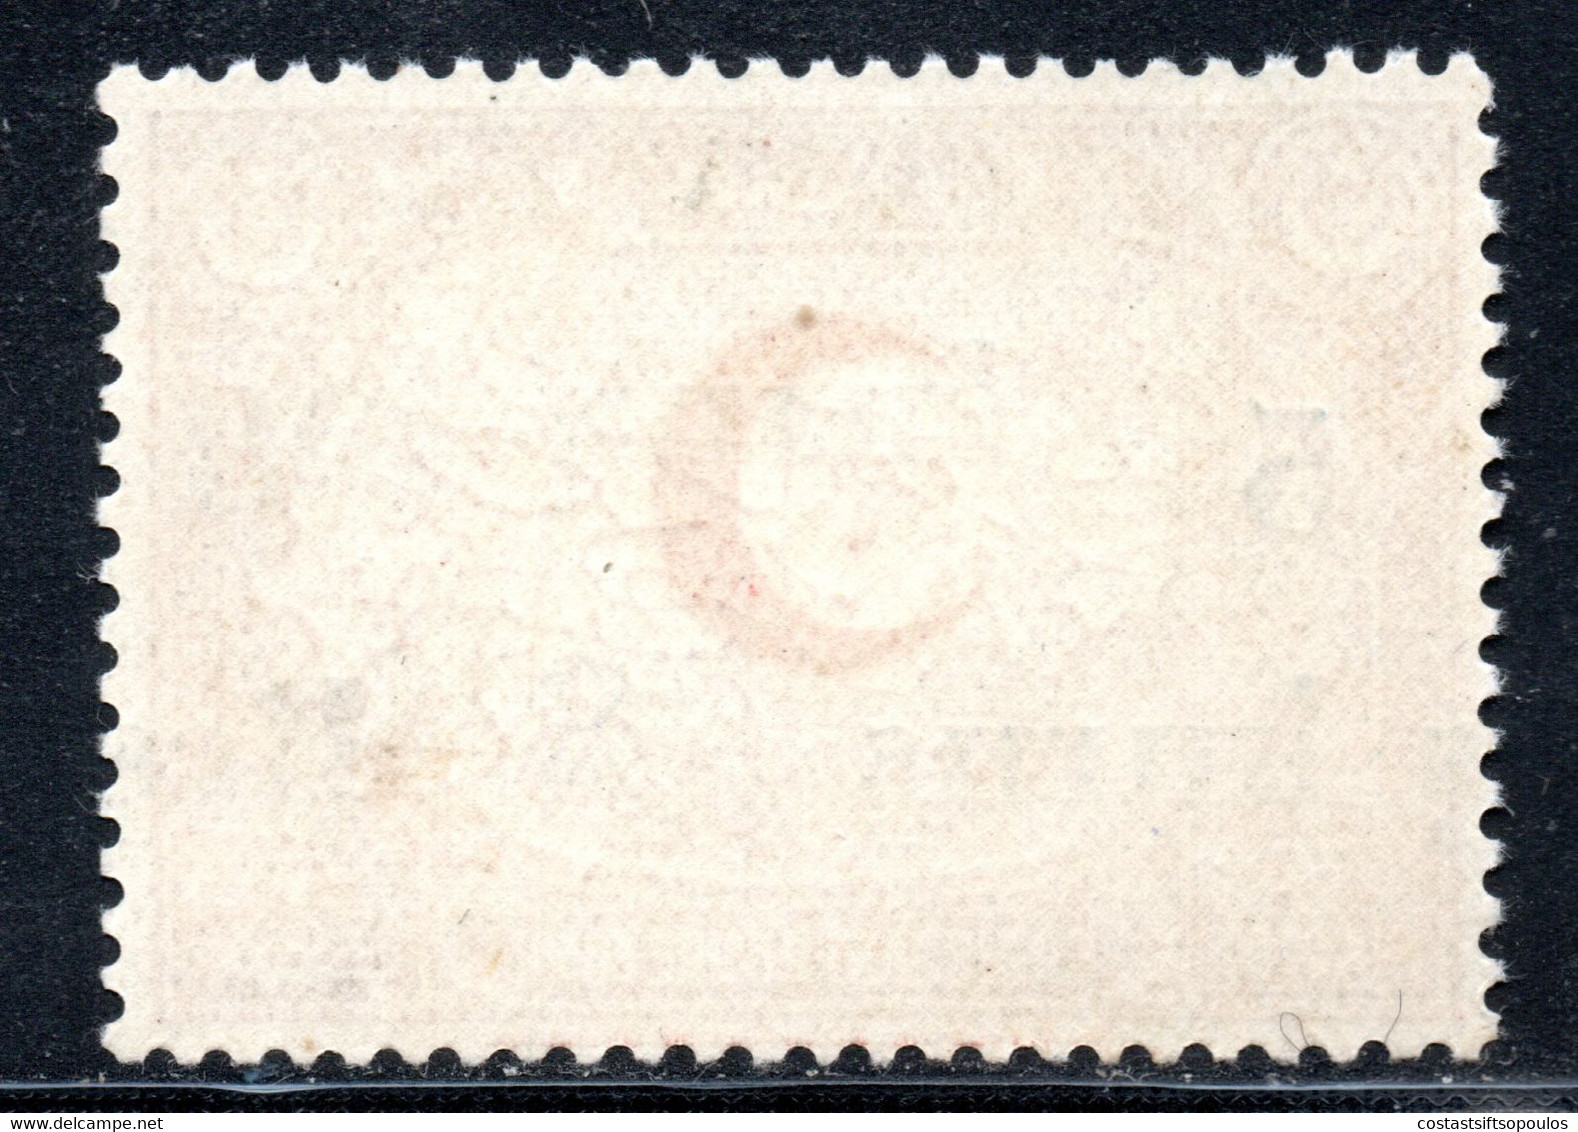 1012.TURKEY,1933-1934 RED CRESCENT,MAP MICH.25,SC.RA 22 DOUBLE SURCHARGE ONE INVERTED,MNH,UNRECORDED - Unused Stamps